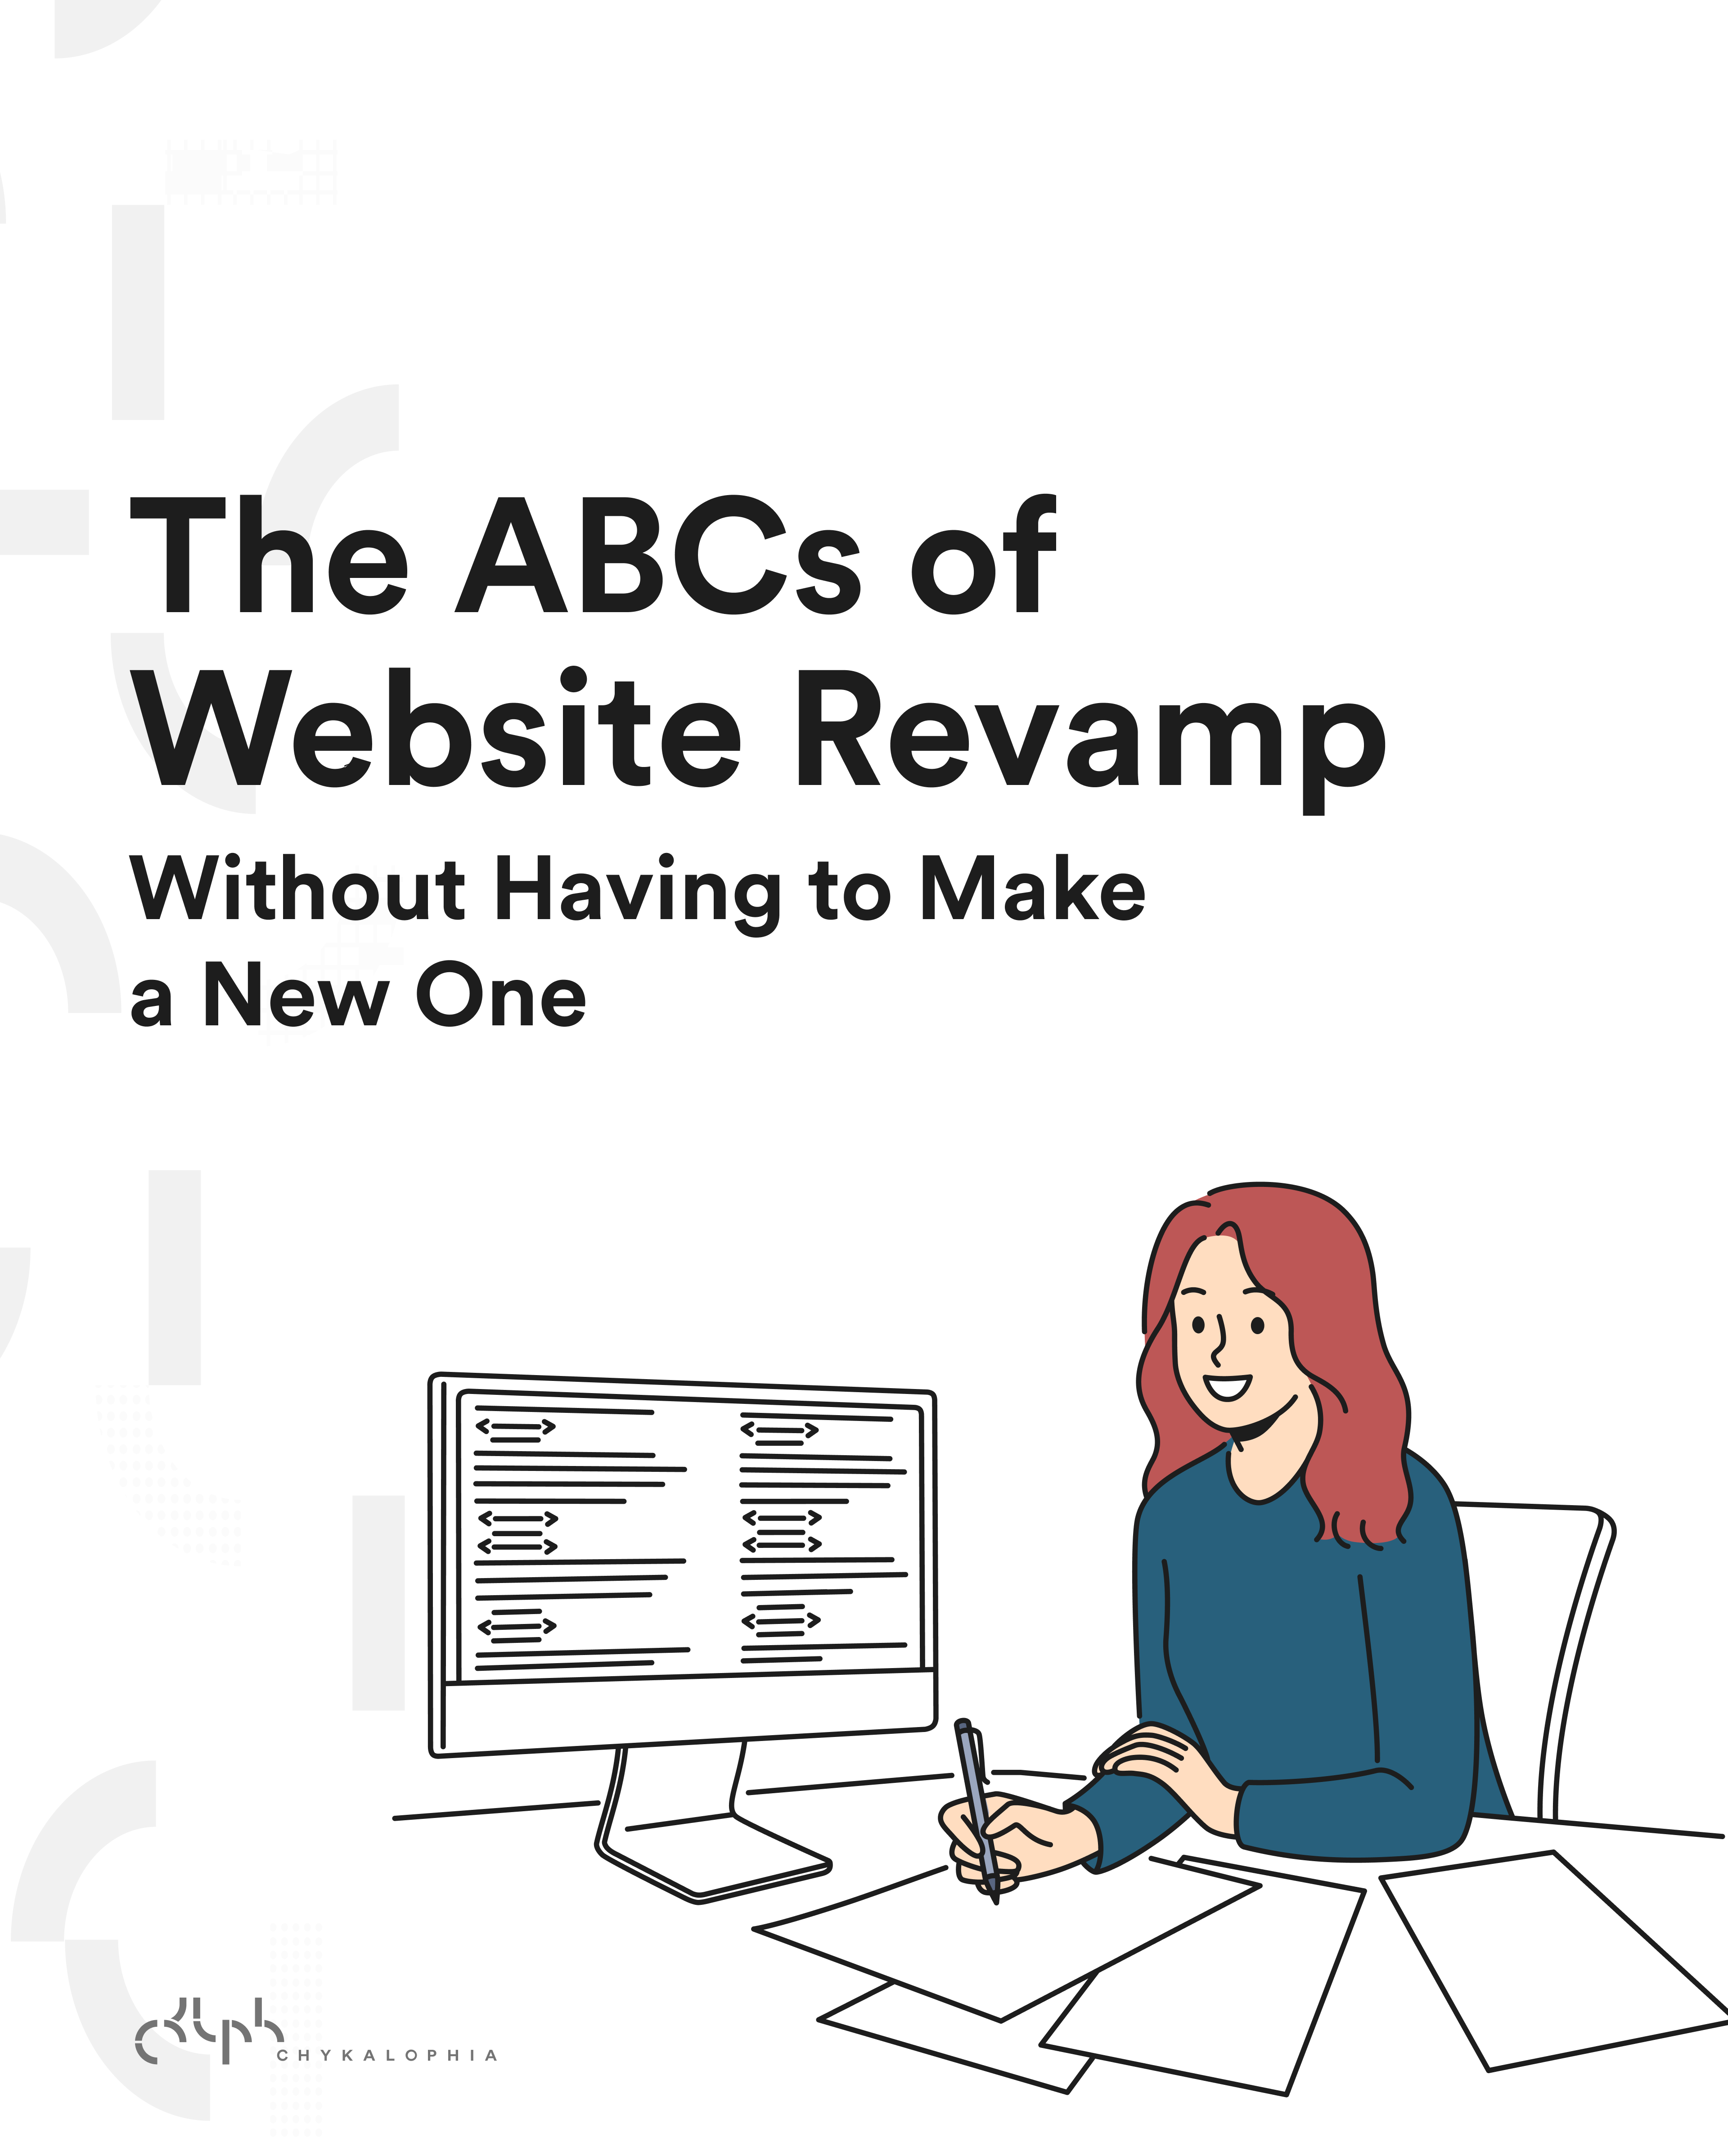 Thumbnail of the ABCs of Website Revamp